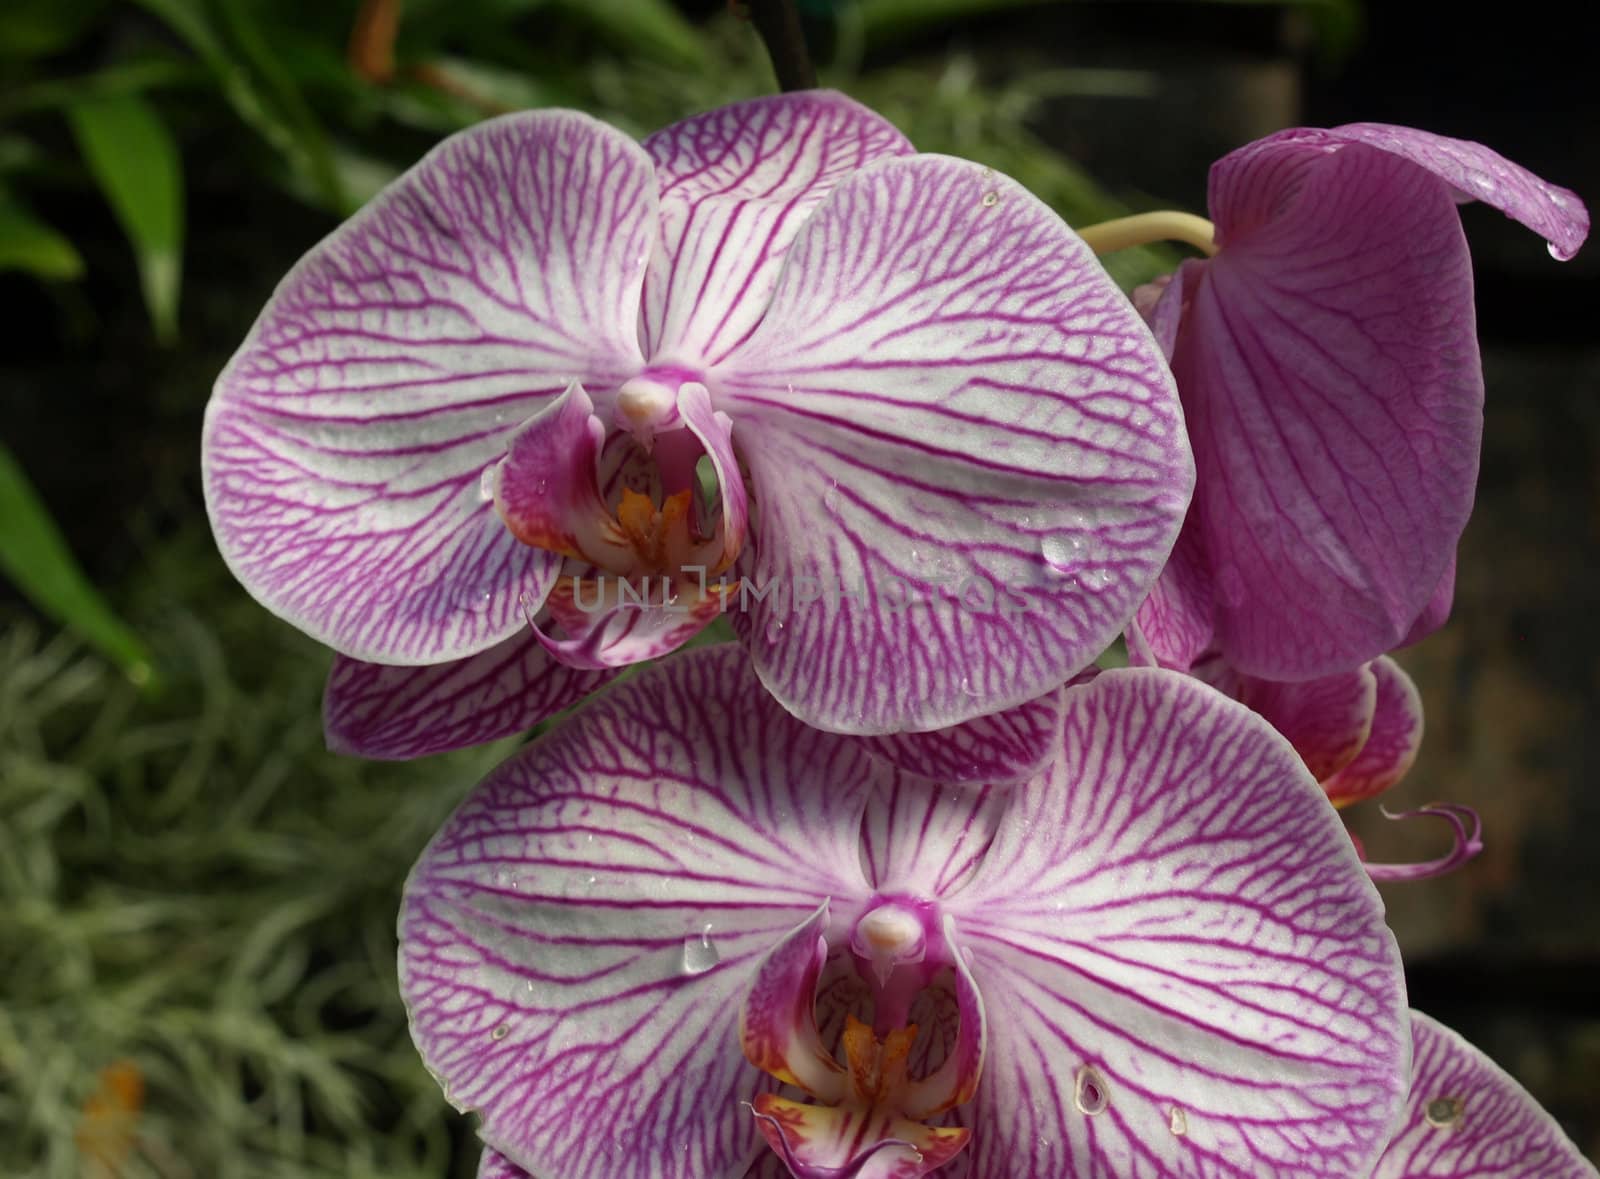 A closeup view of large purple orchids